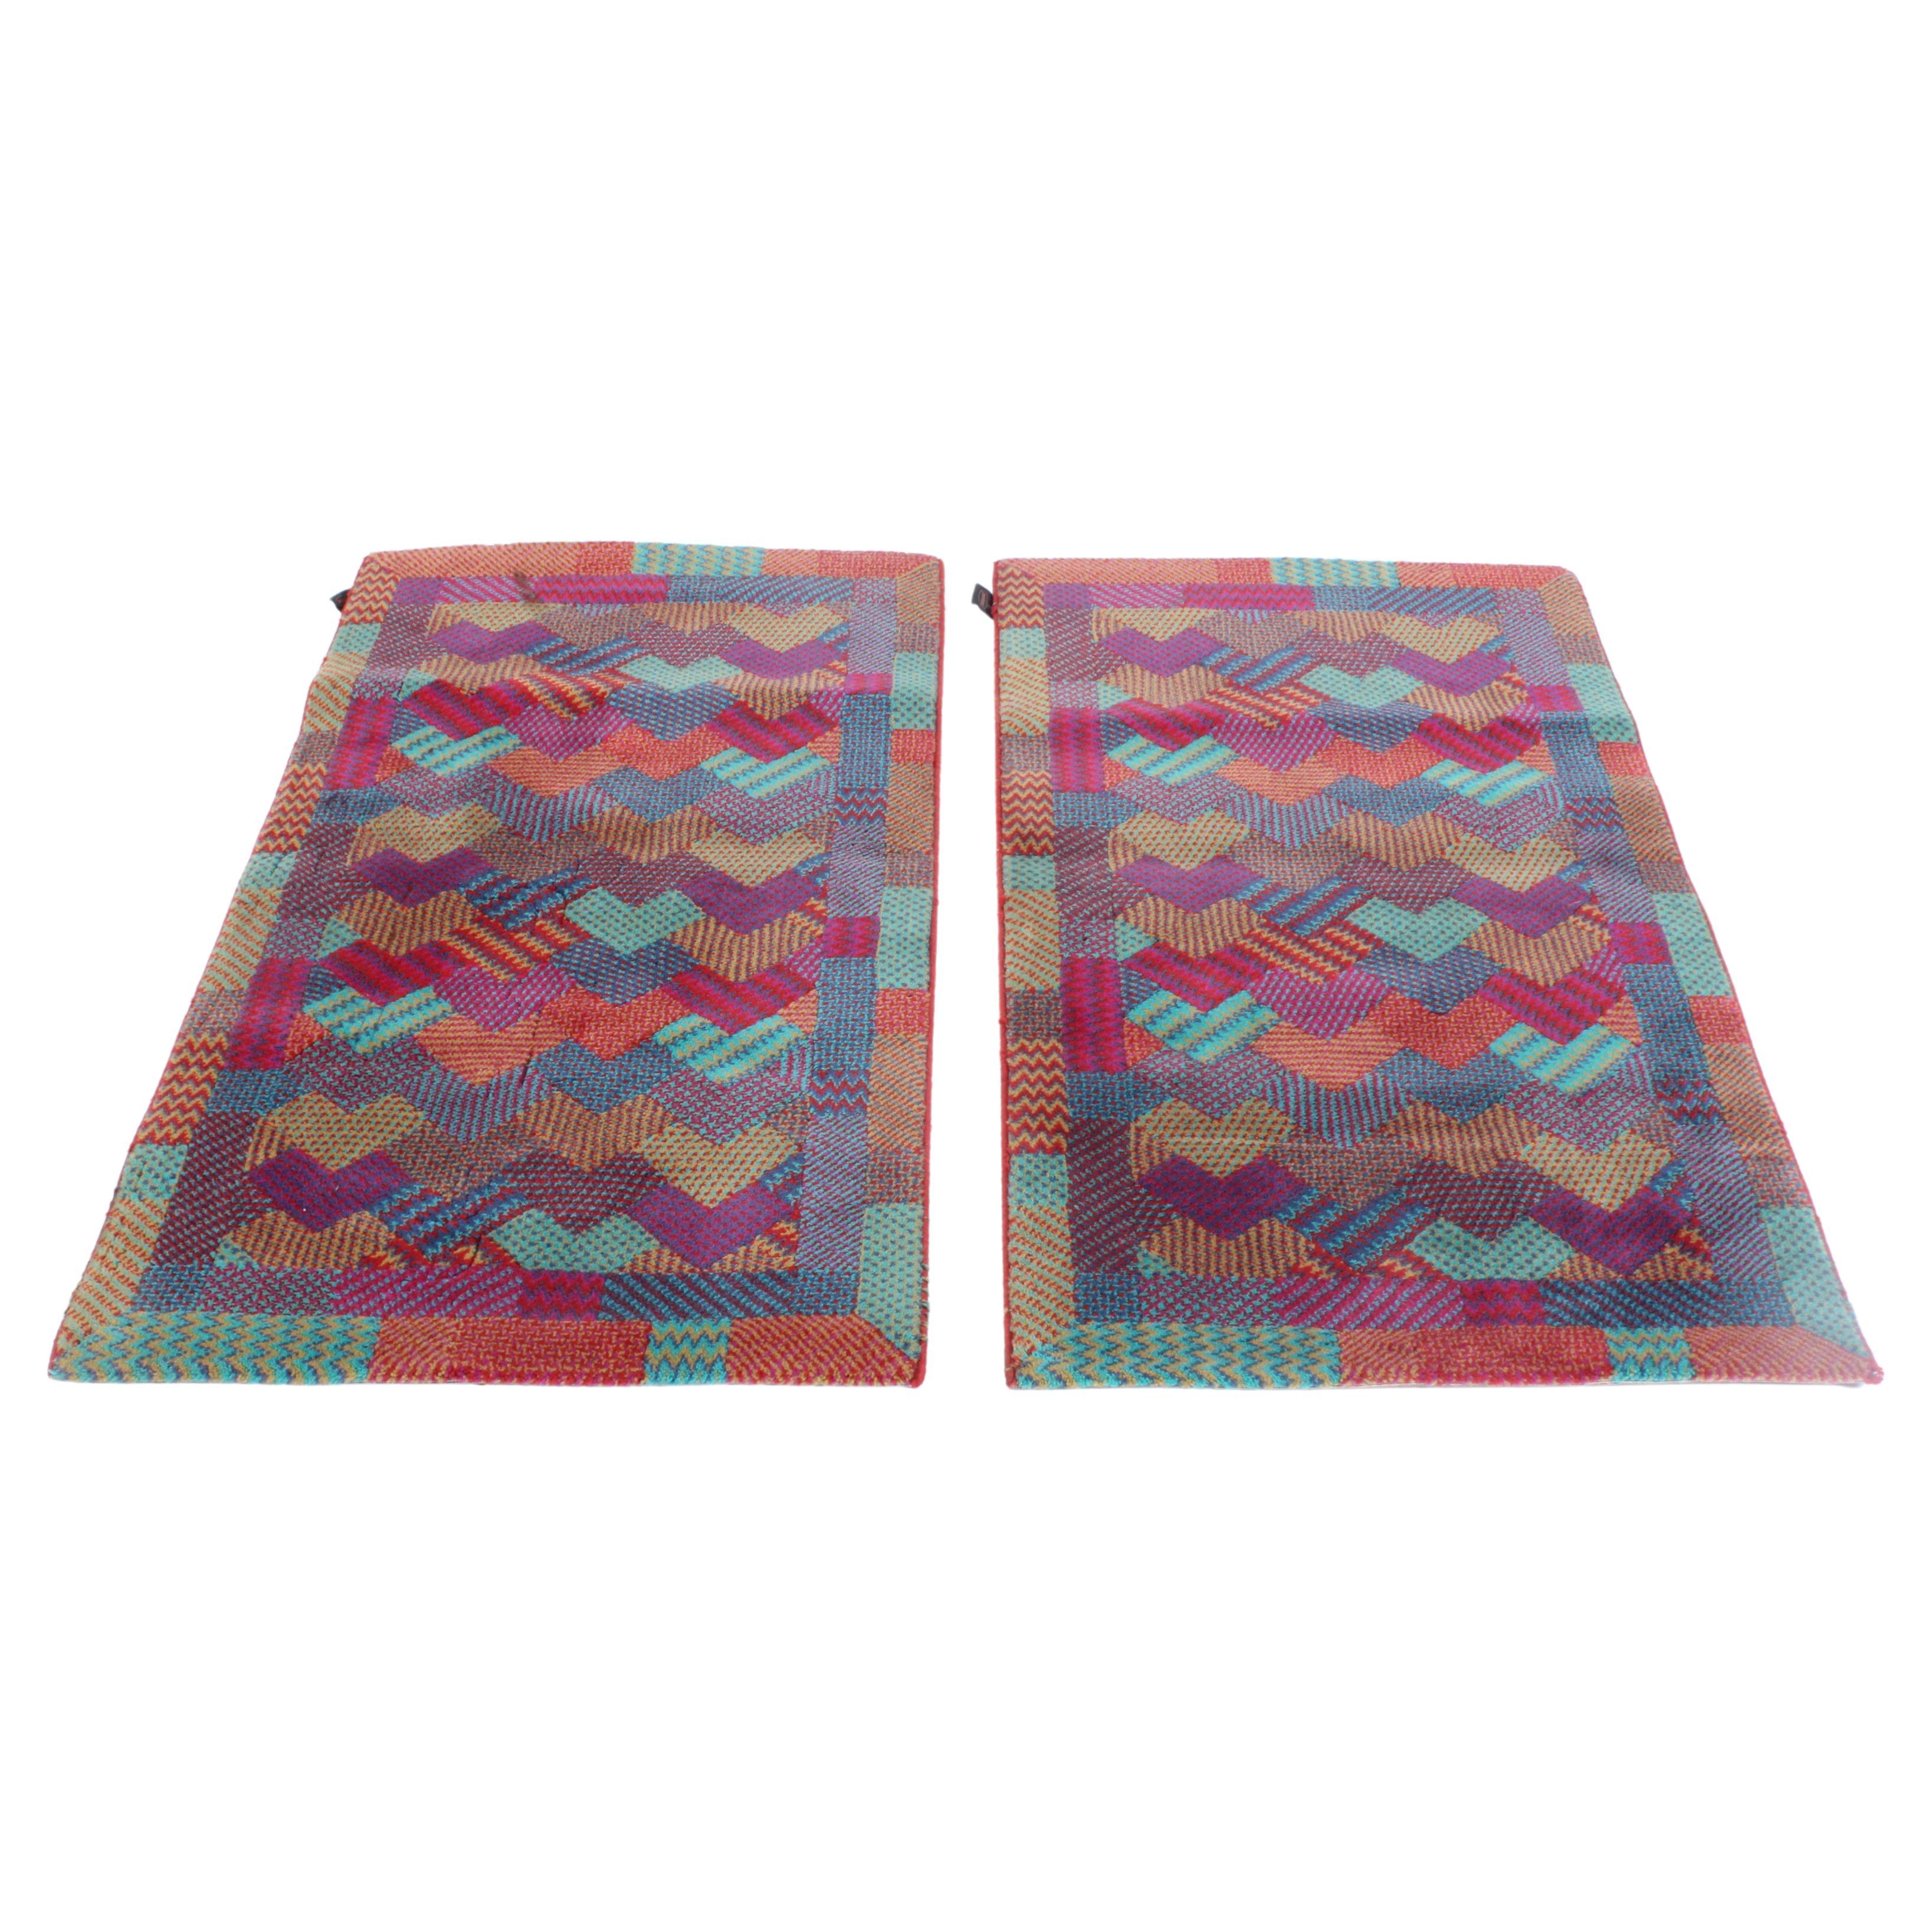 Pair of Small Scale Vintage Missoni Rugs 